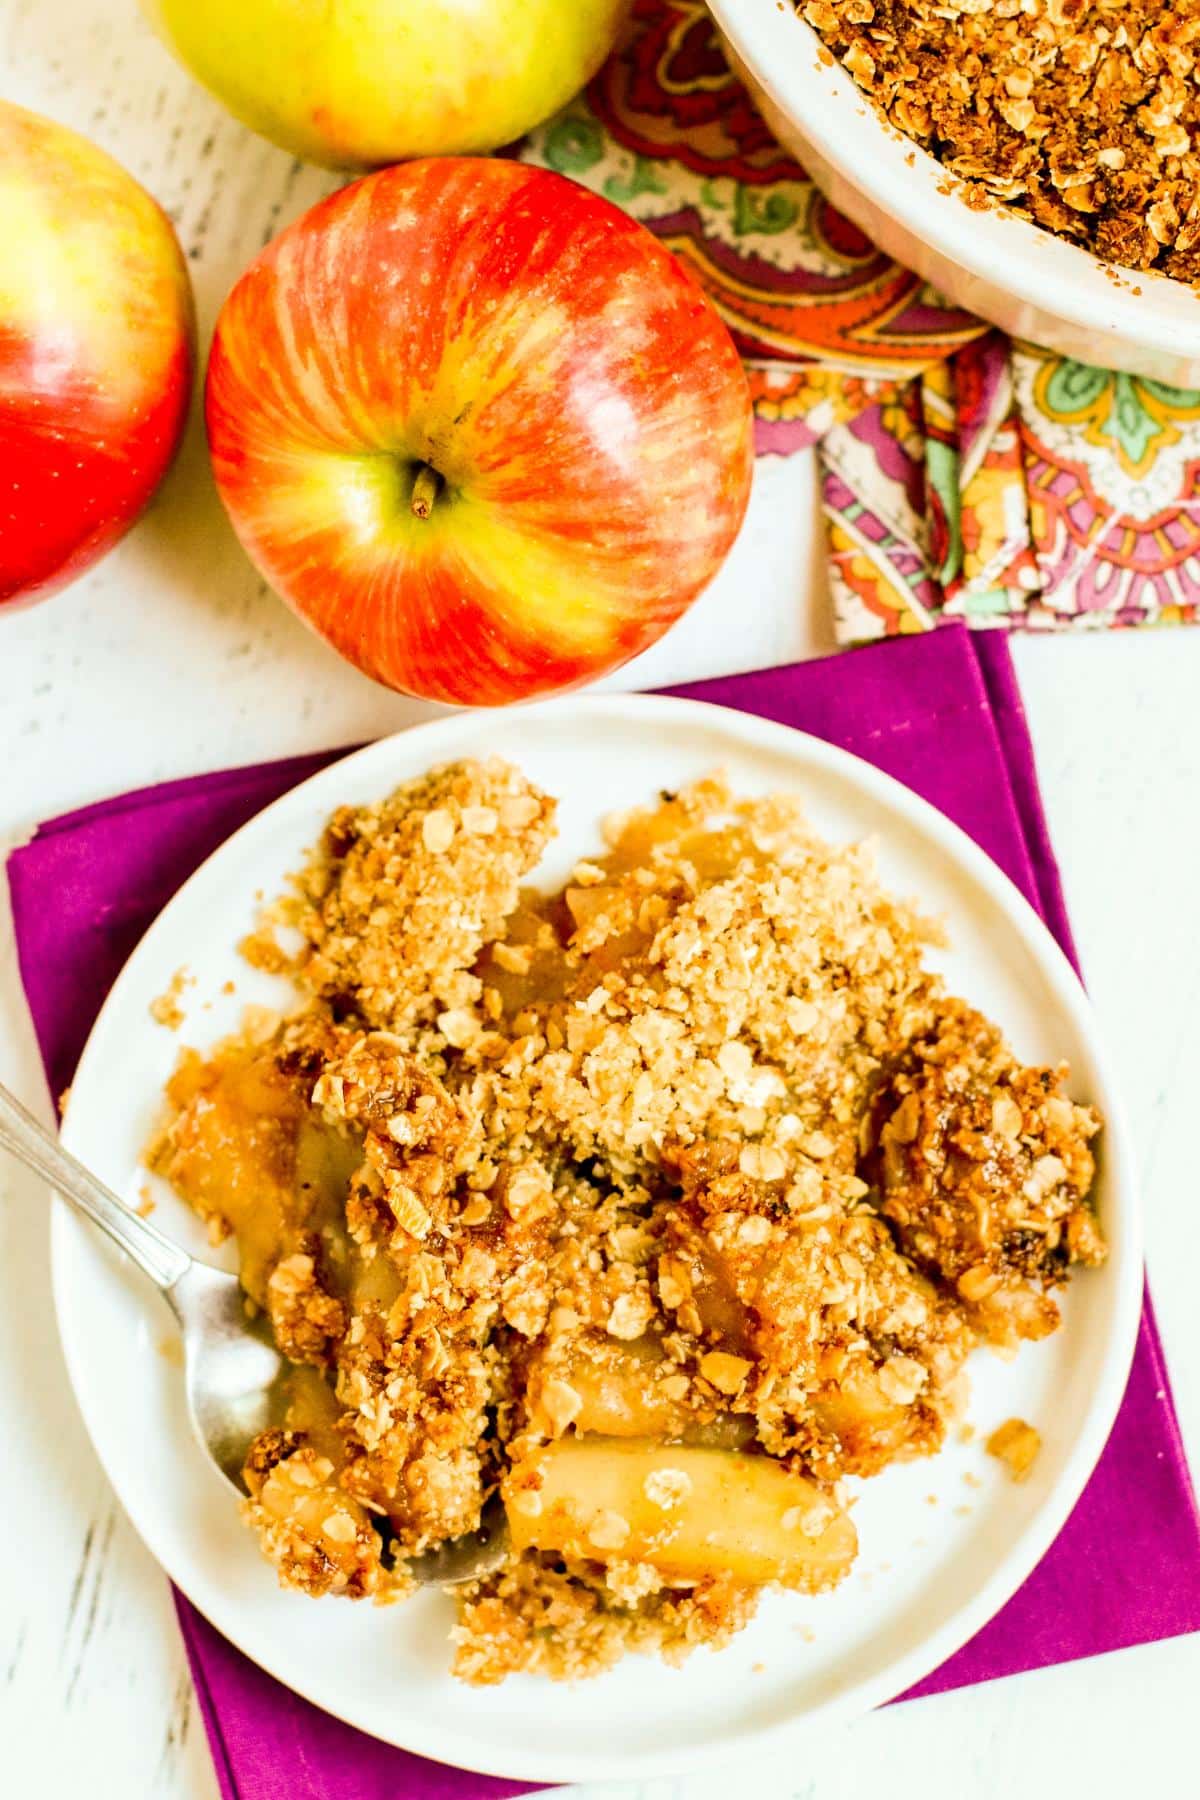 Serving of apple crisp on a plate with a dessert spoon.